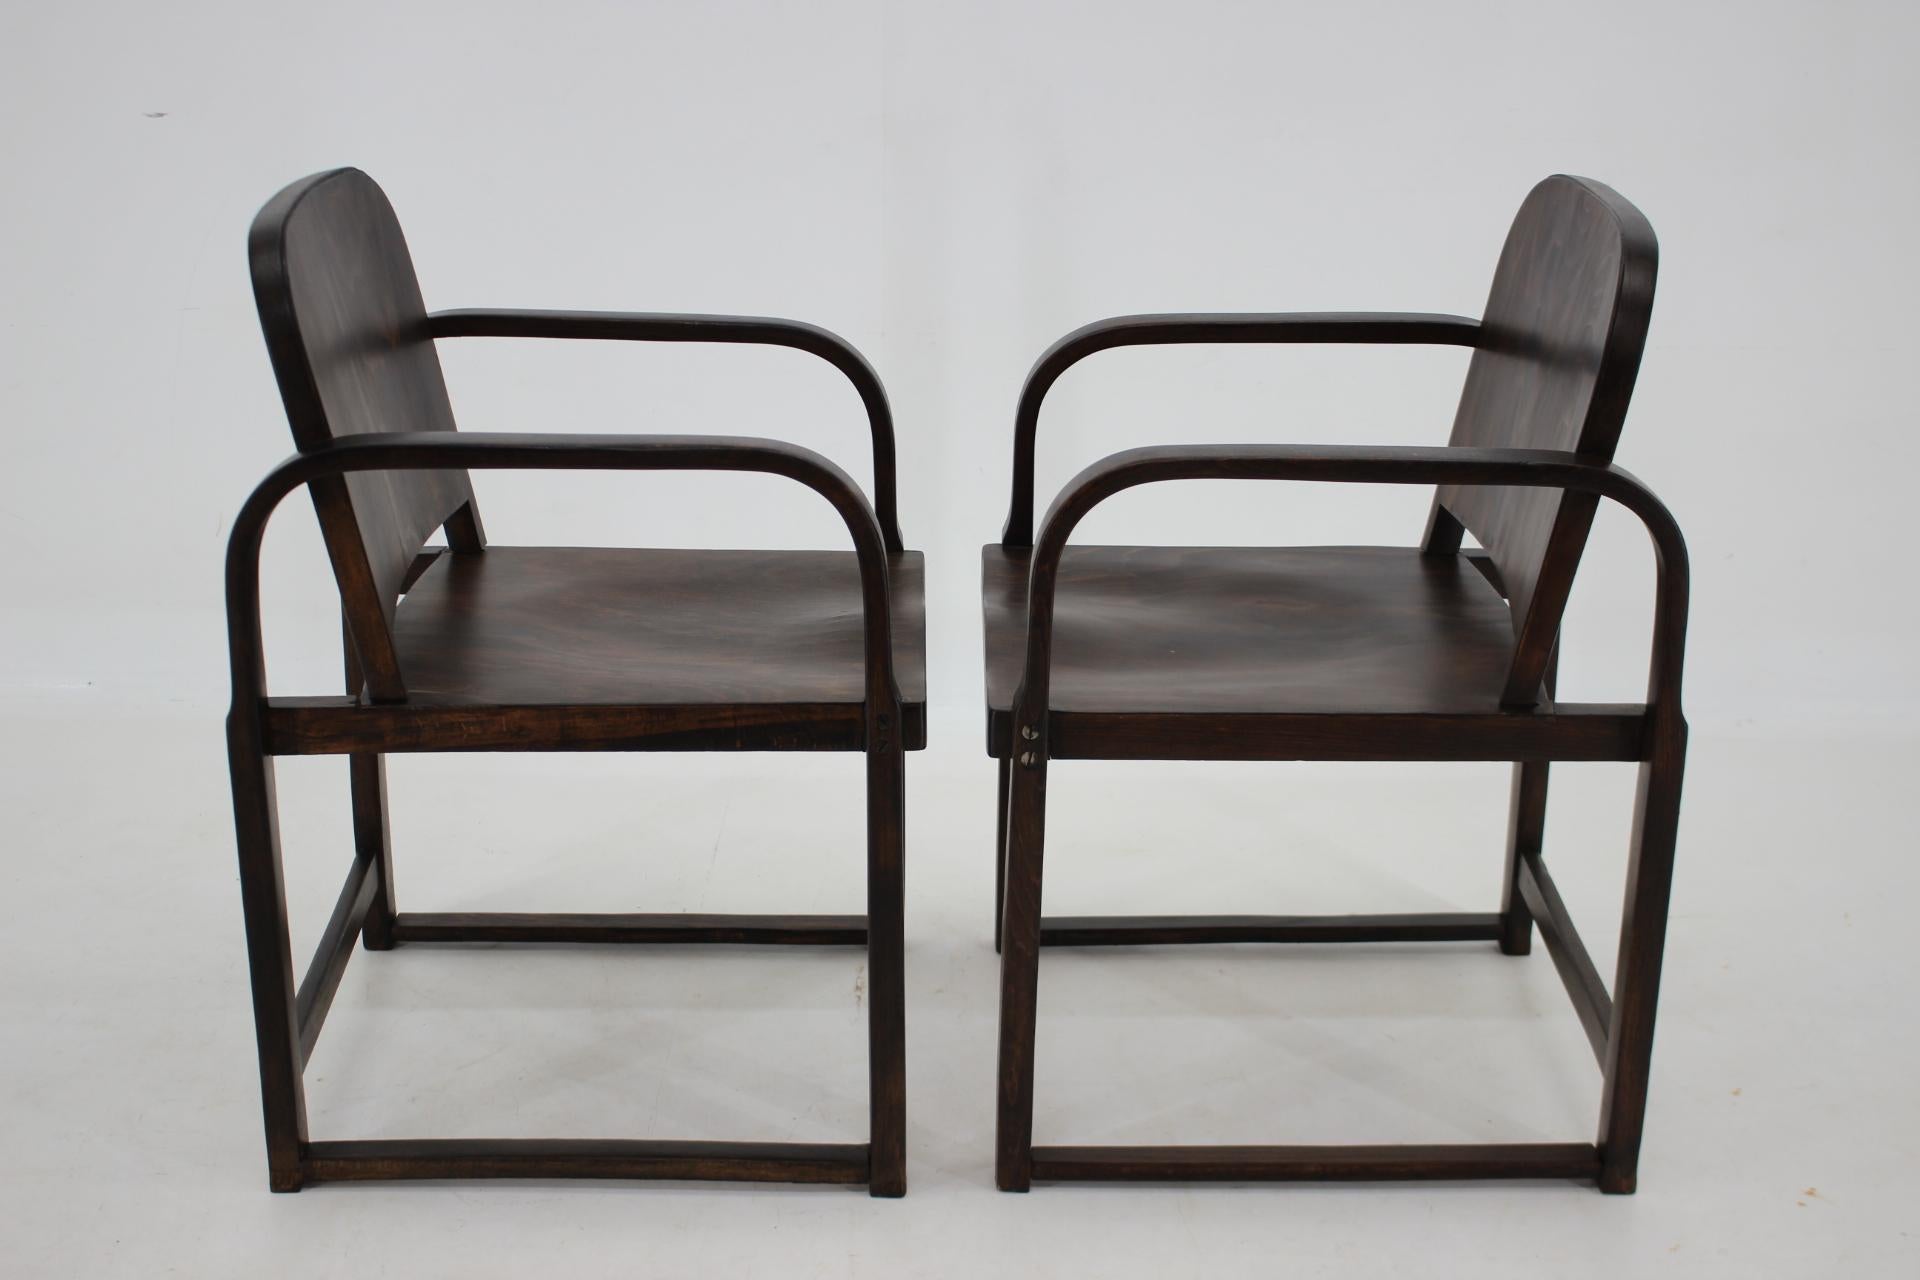 - both items have been carefully refurbished 
- Height of the armrests are 69cm.